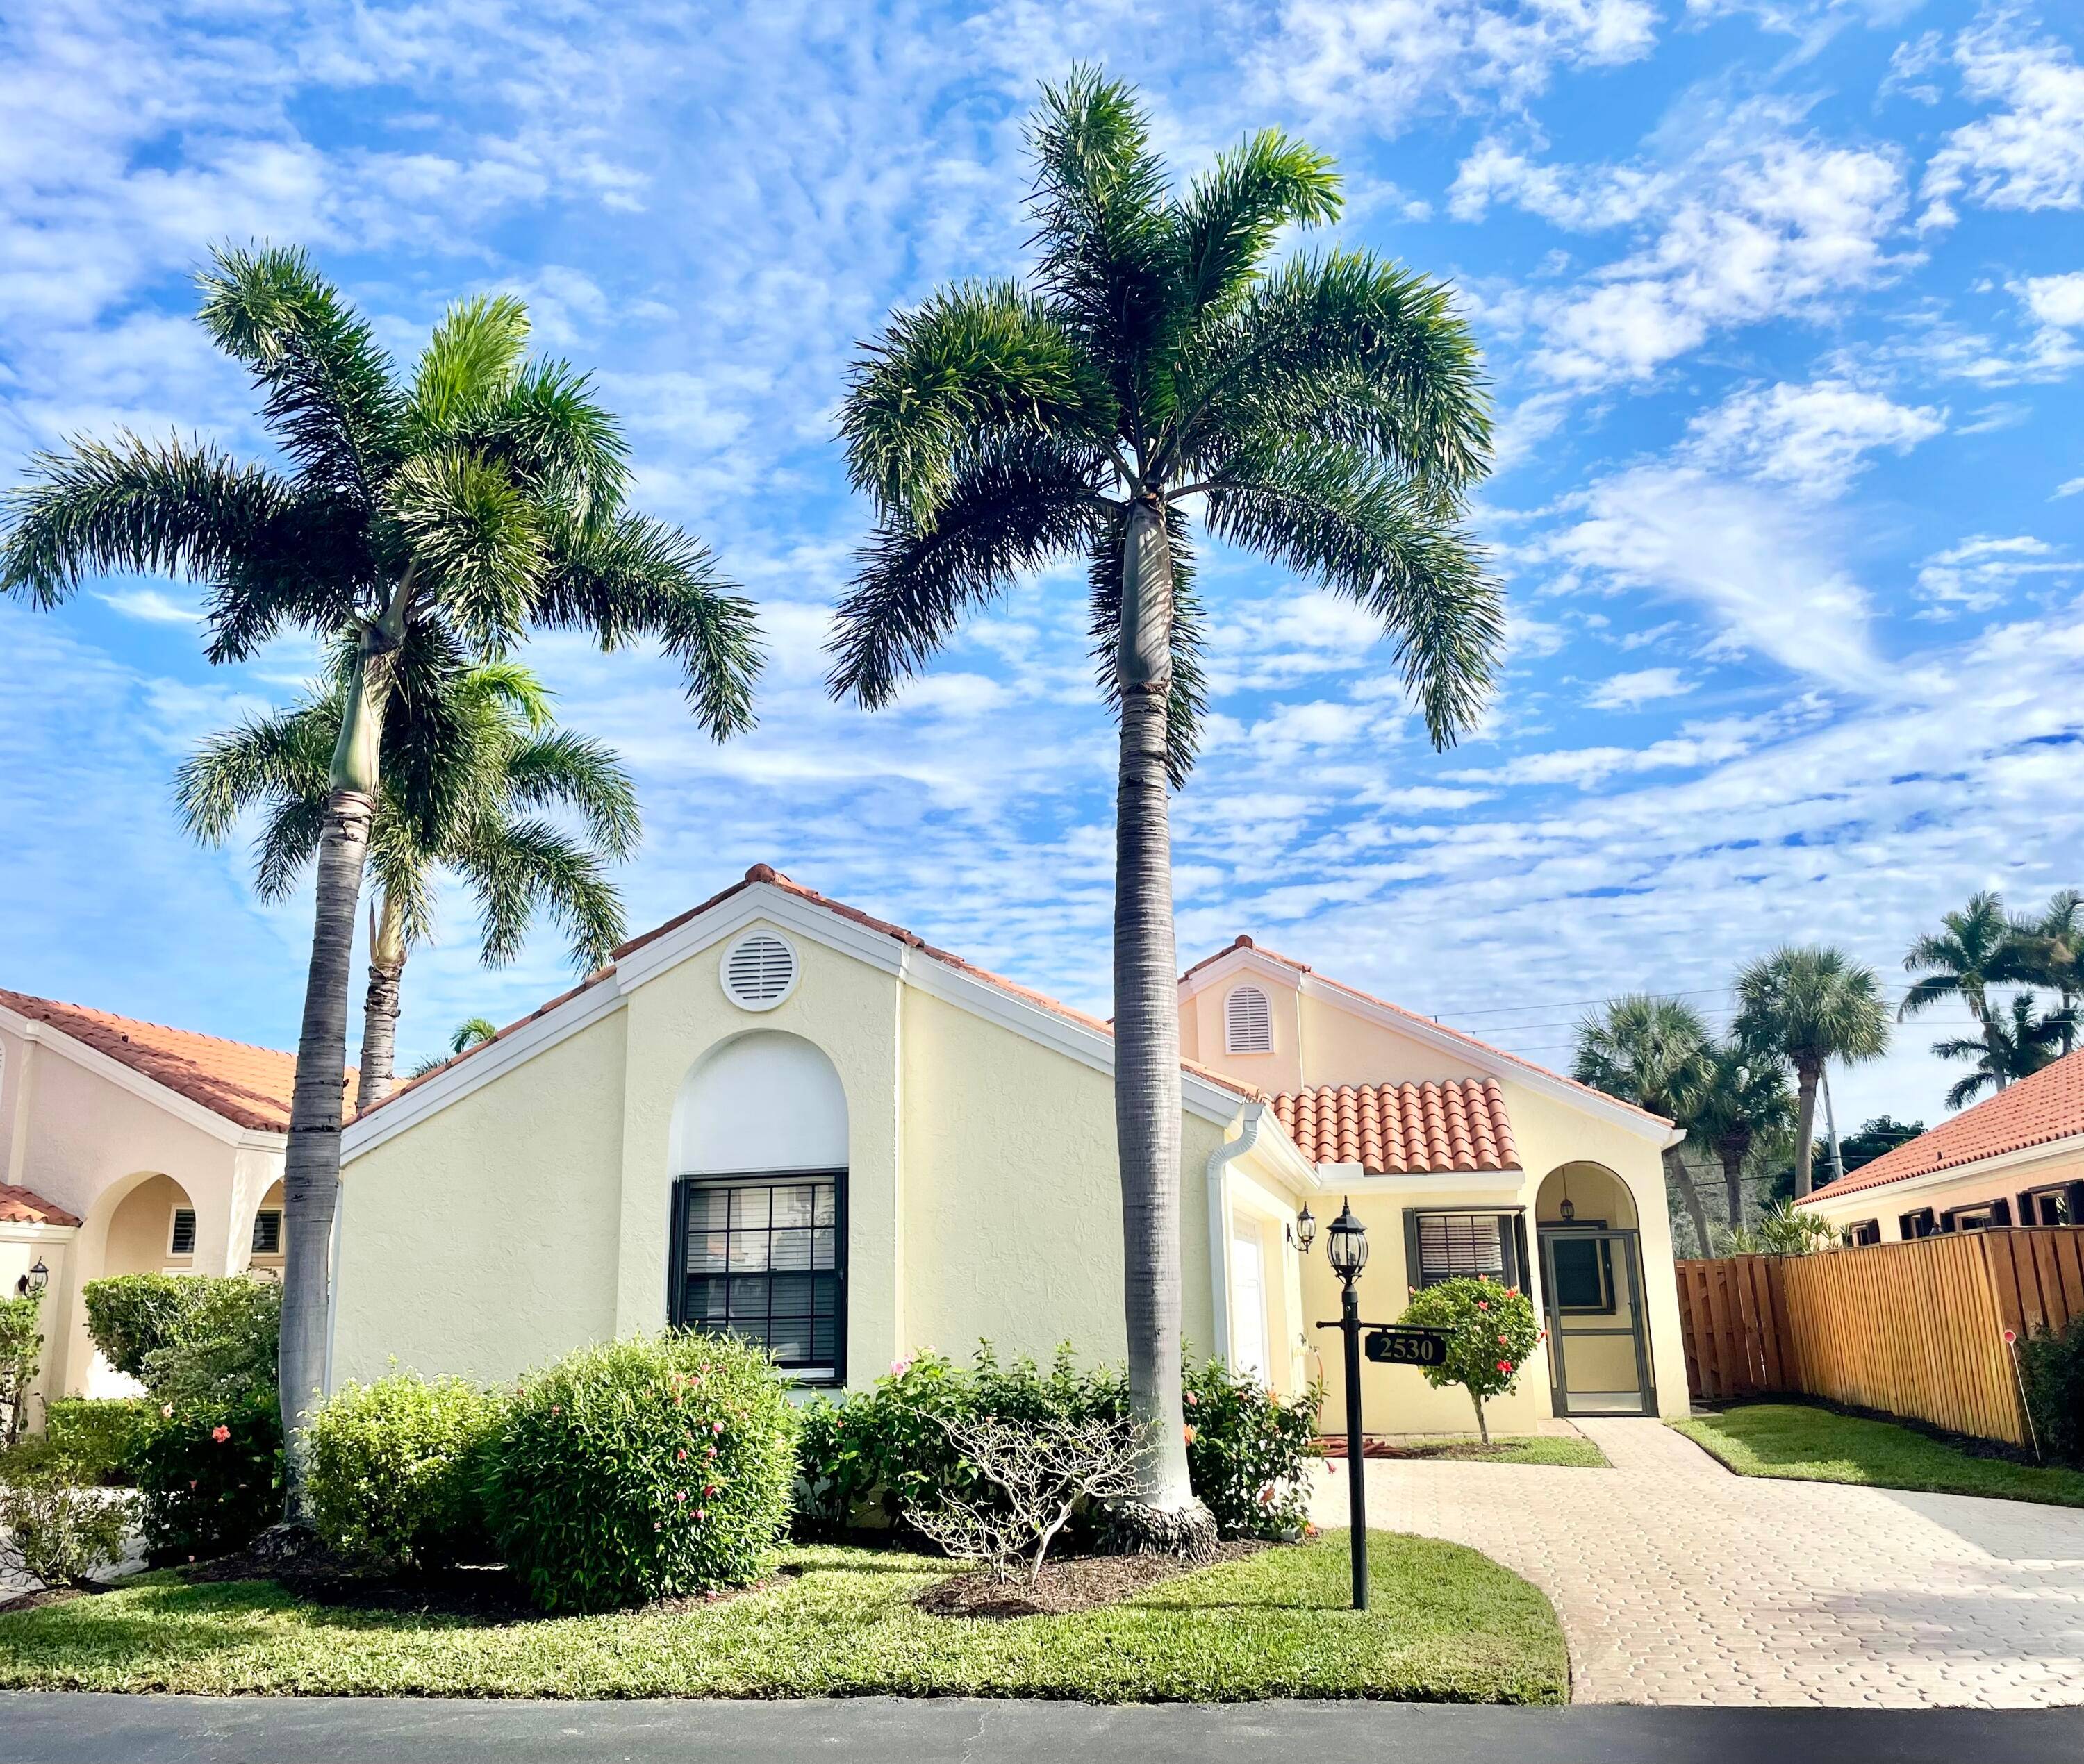 Enjoy coastal living in this stunning 3 bedroom, 2 bathroom pool home nestled in the sought after Crystal Pointe community in Palm Beach Gardens.